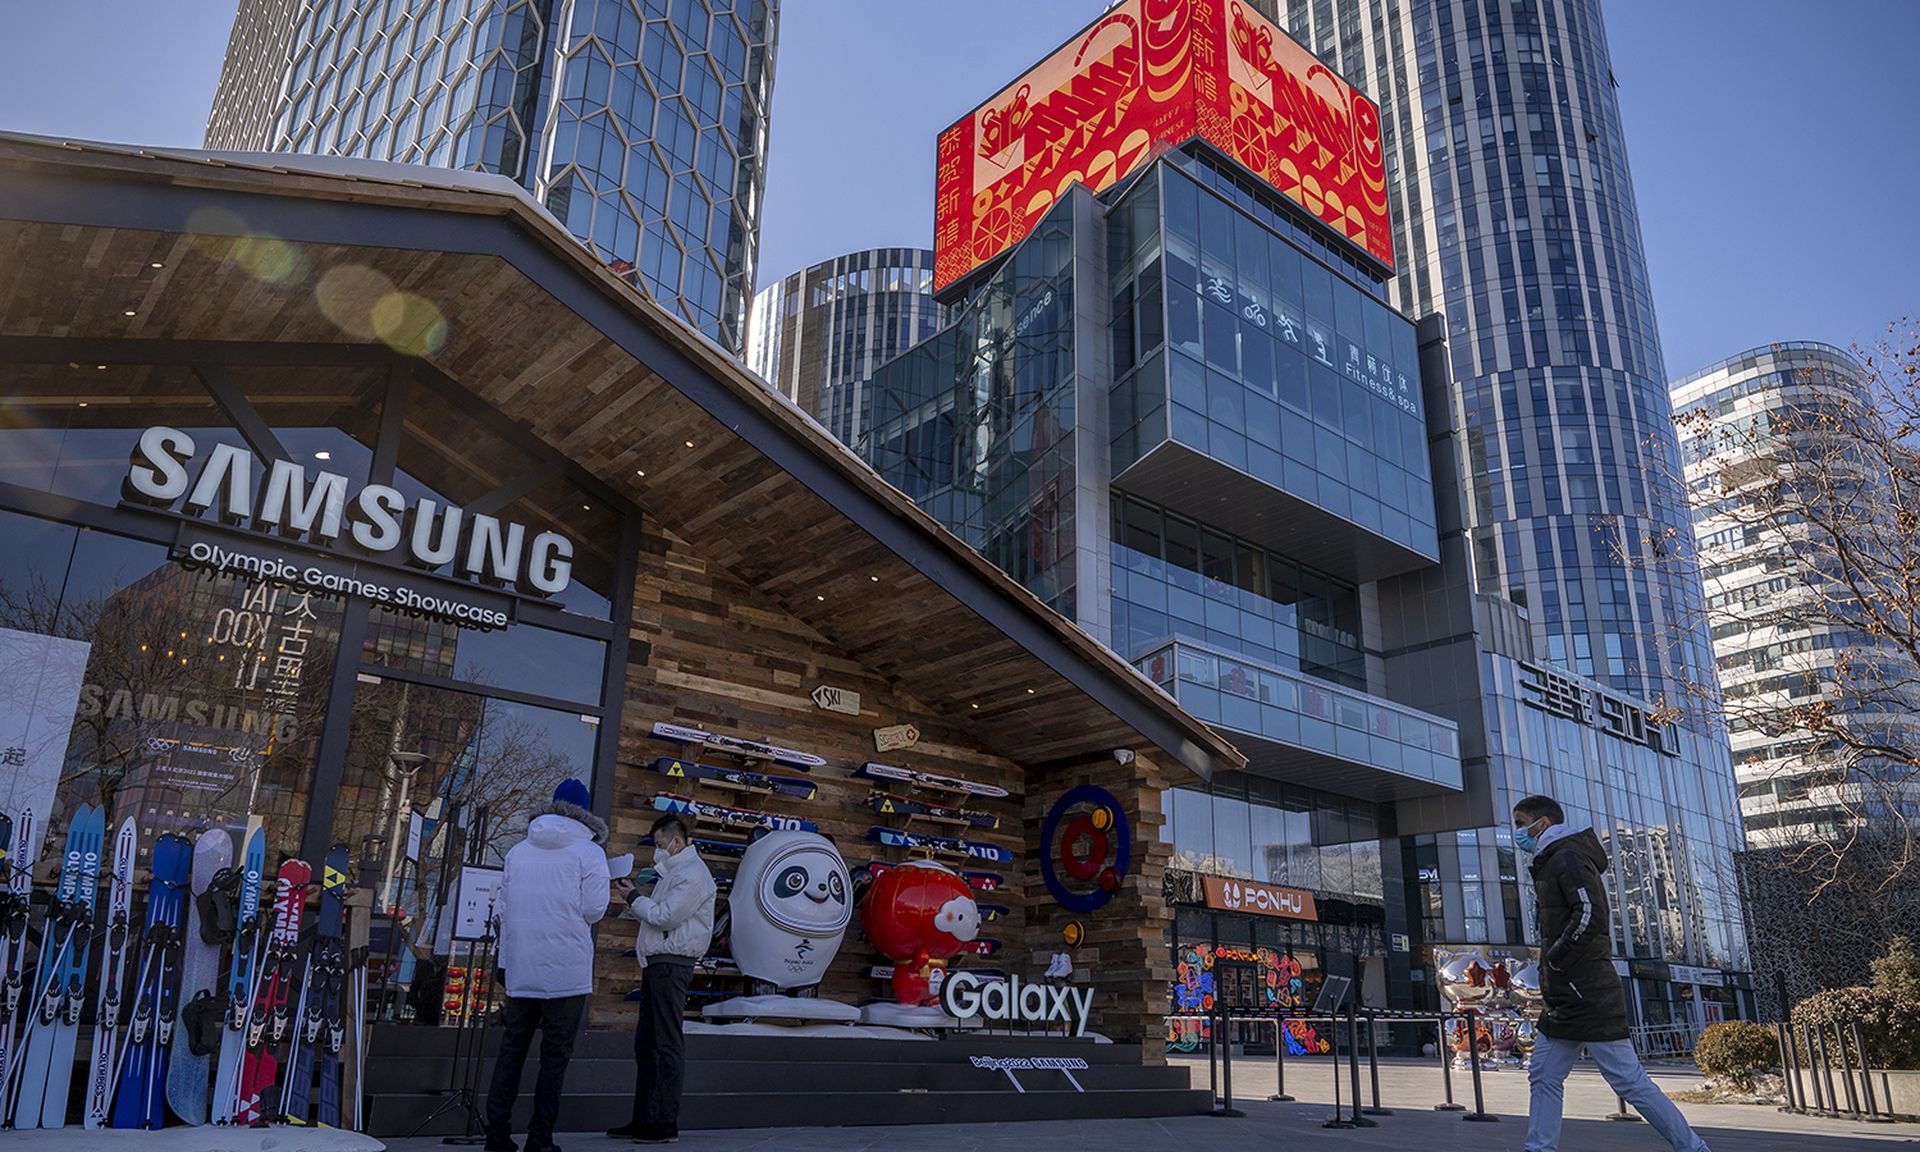 Electronics giant Samsung confirmed source code for its Galaxy devices was leaked after a data breach. Pictured: People stand in front of a Samsung exhibition with the theme of Winter Olympics in a shopping district of Beijing on Feb. 2, 2022, in Beijing, China. (Photo by Andrea Verdelli/Getty Images)